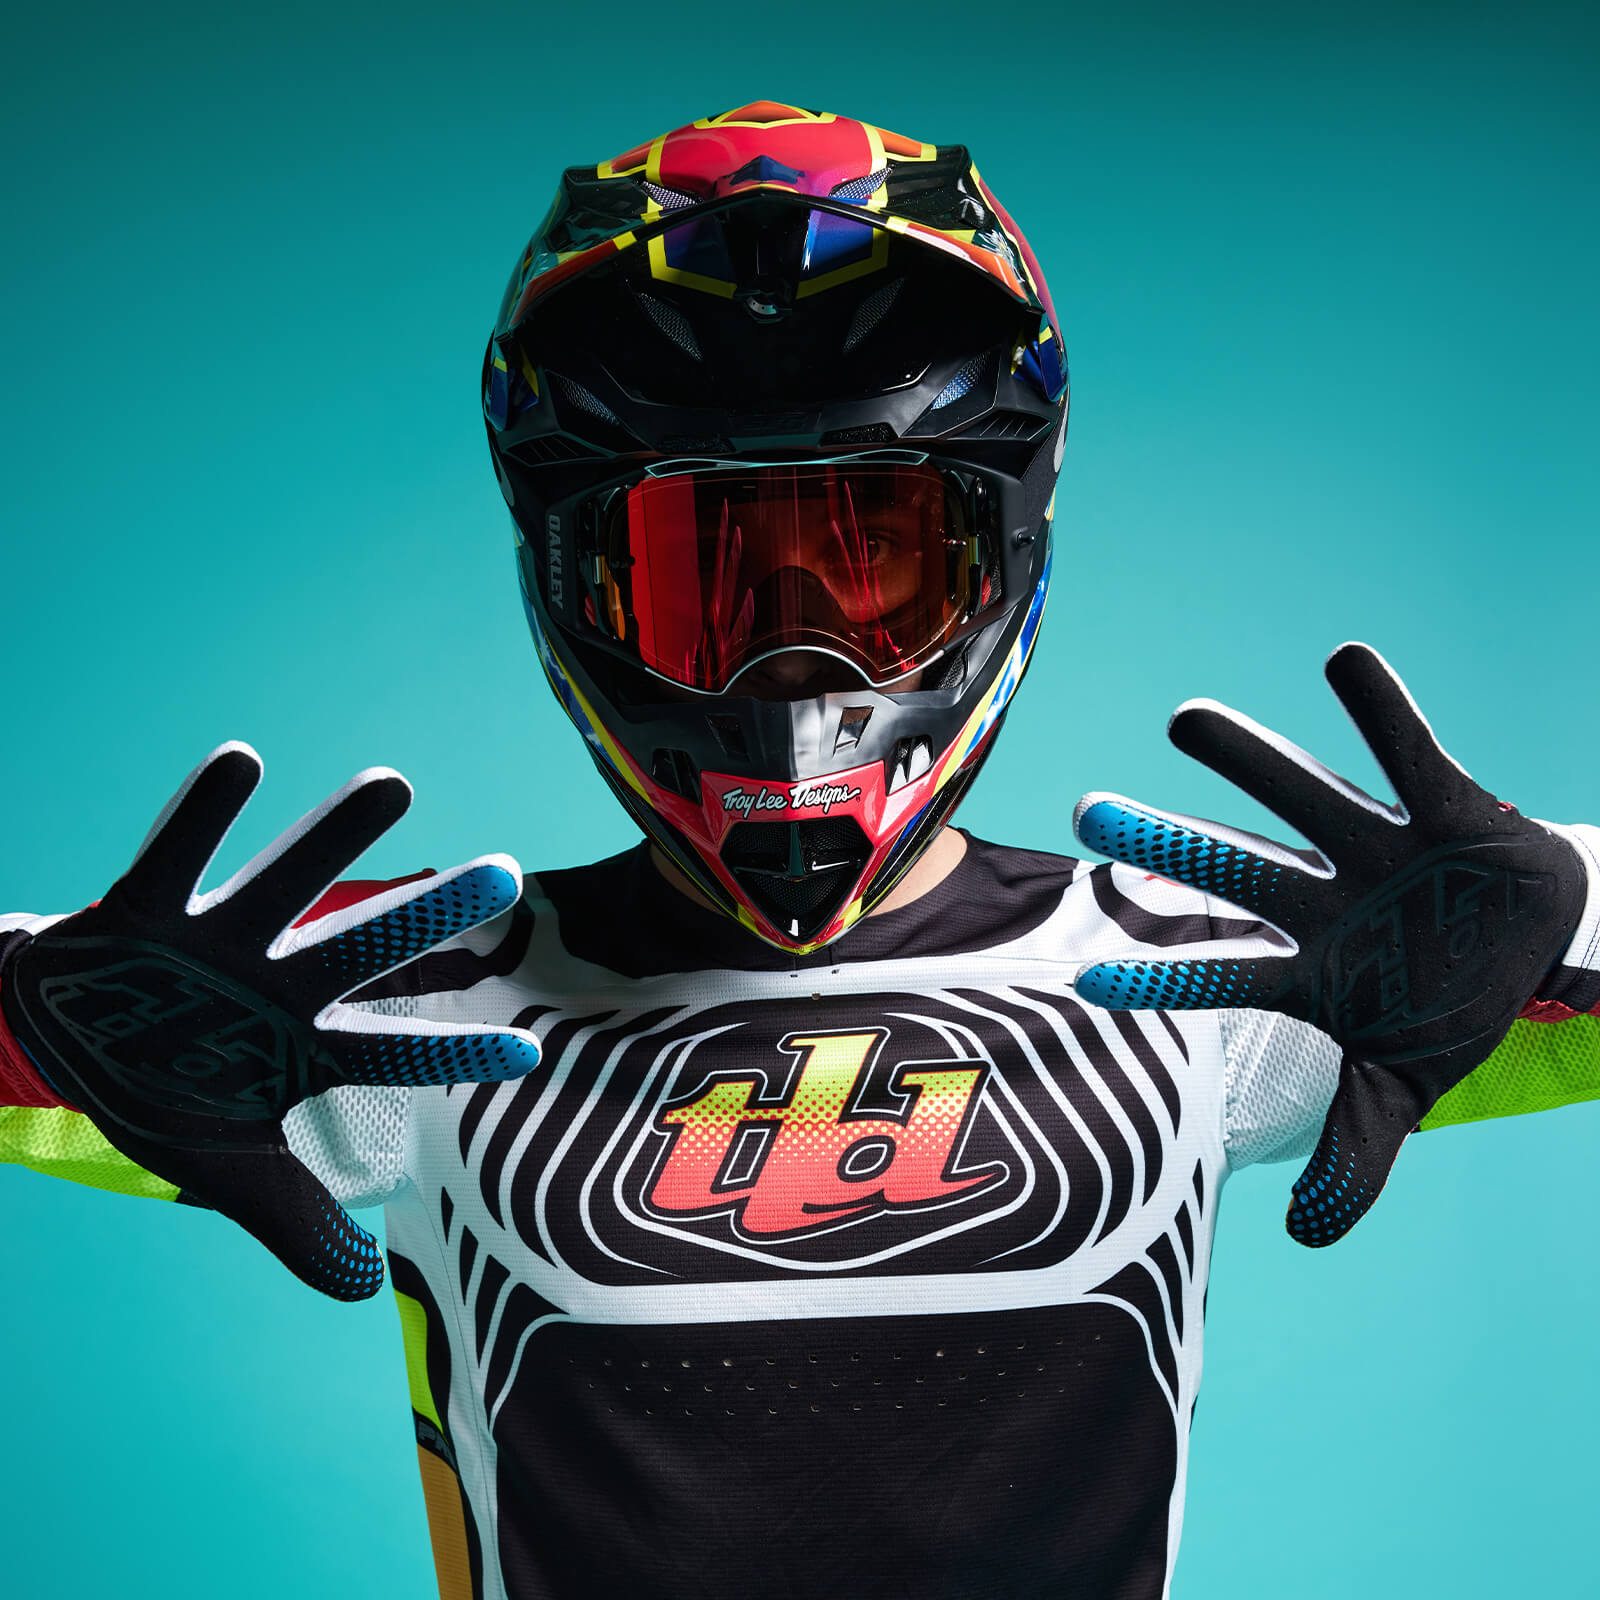 New Troy Lee Designs Moto gloves in stock